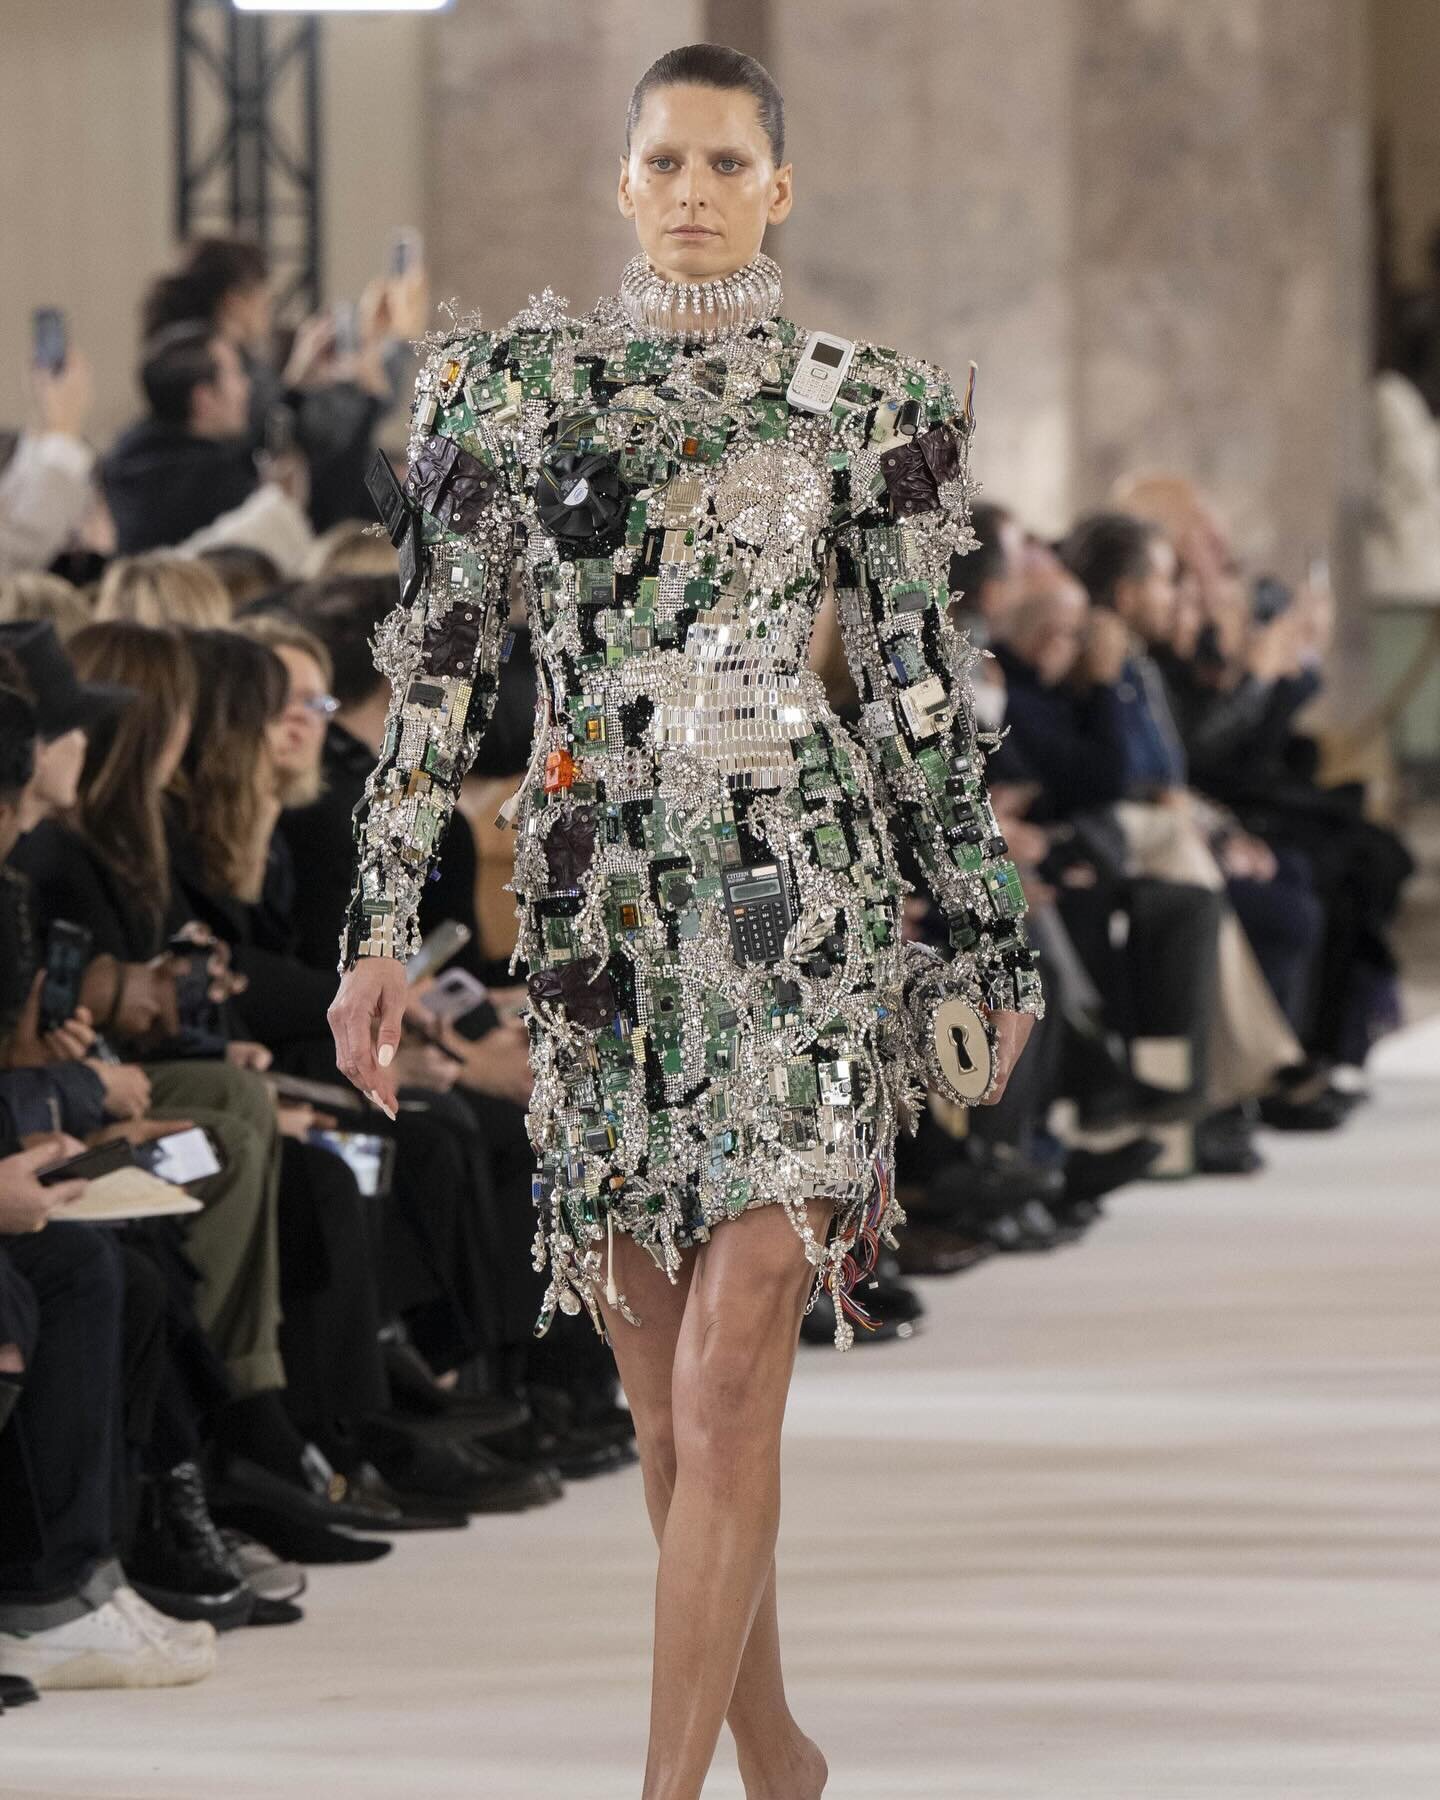 motherboard @schiaparelli 🪩💿📟💾📠💽🎚️

Couture with chips, motherboards, tech from 20 years ago and a dash of mirrorball 

The @schiaparelli obsession and @danielroseberry magic truly something else